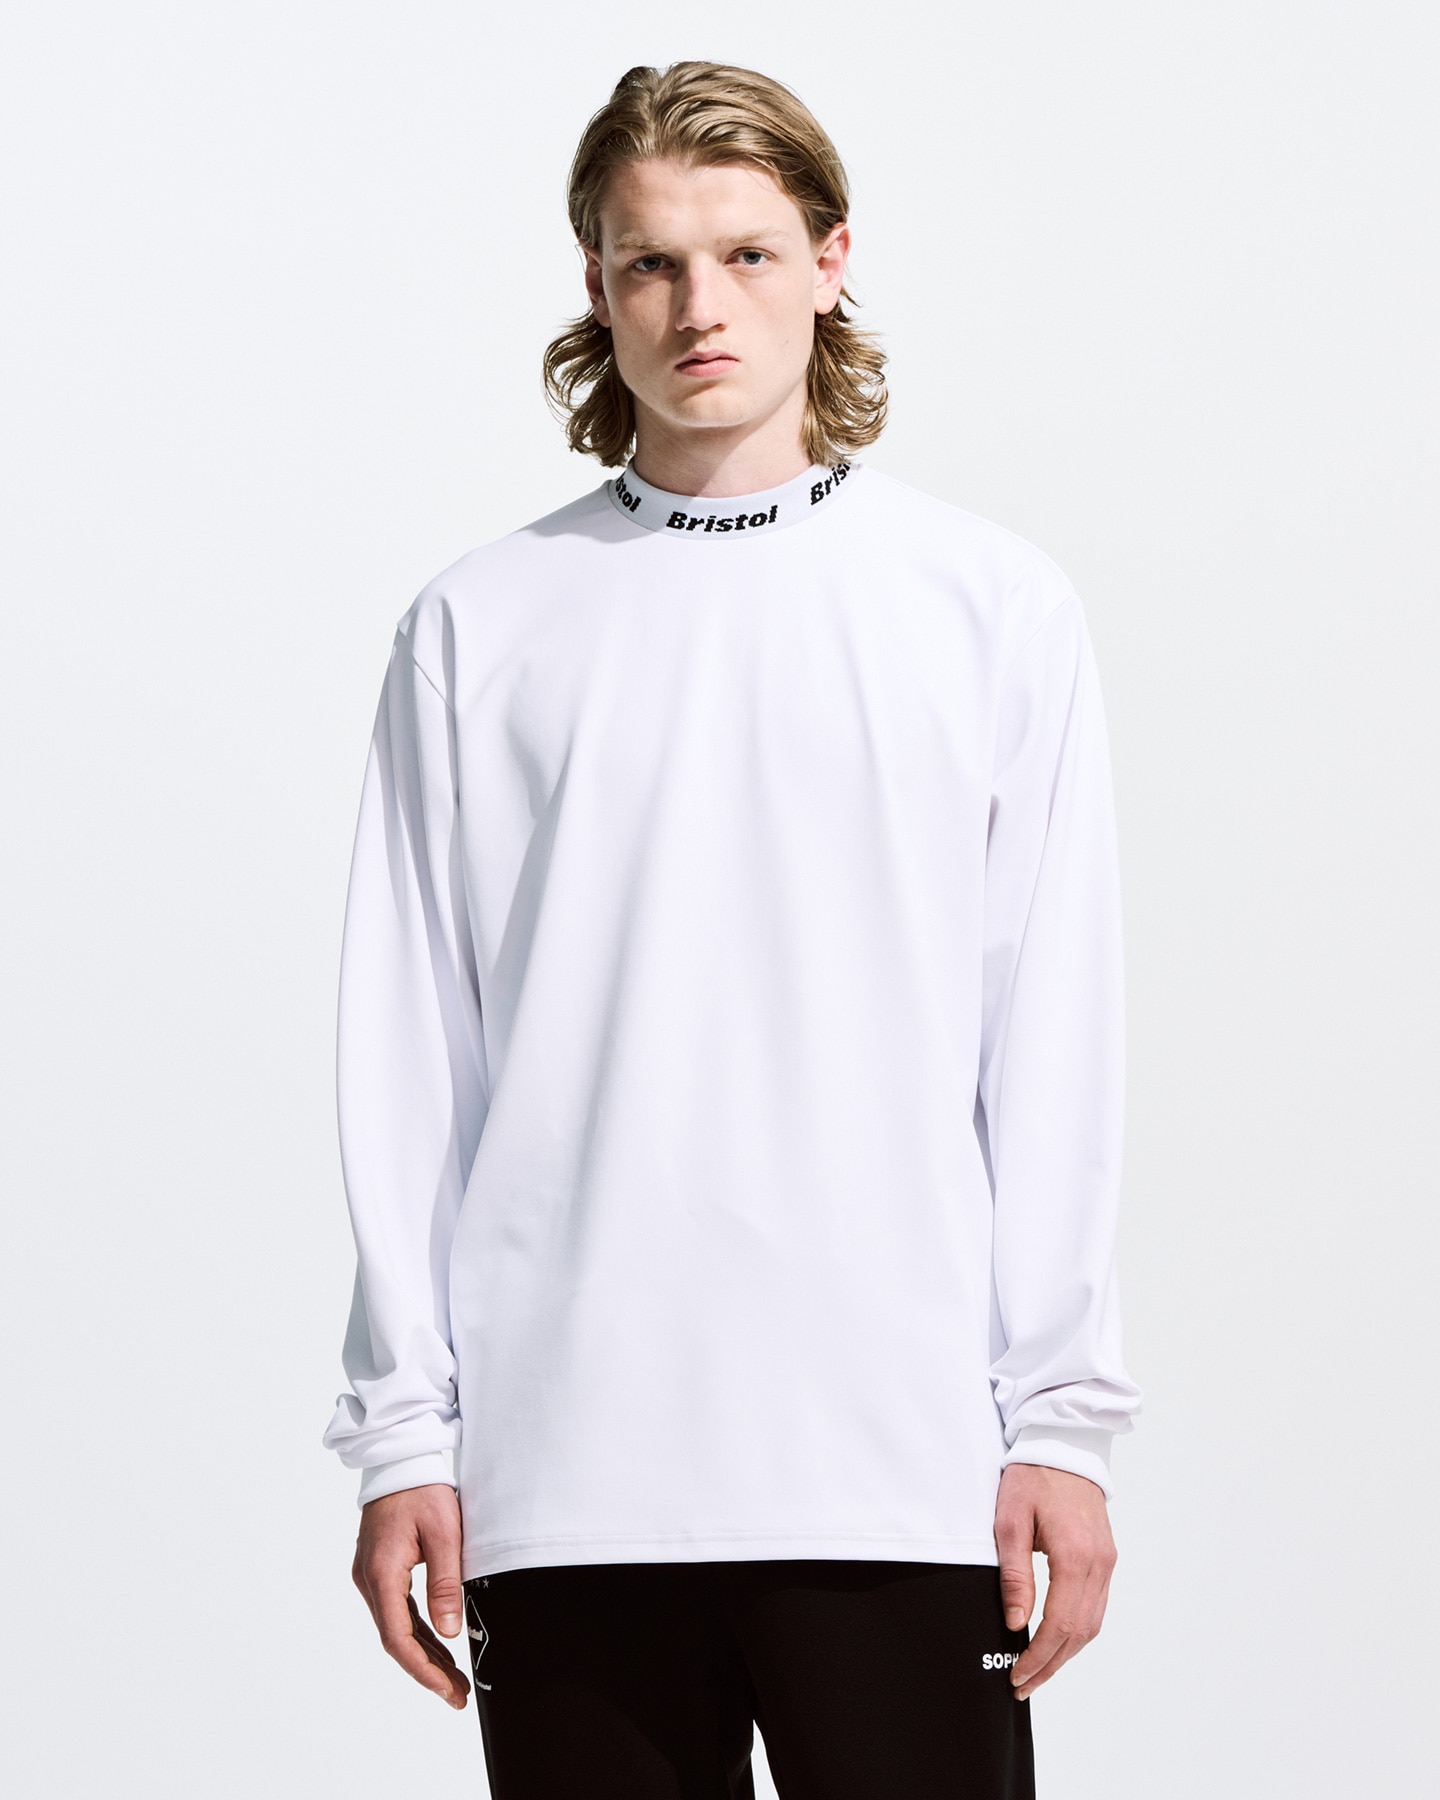 FCRB 22aw L/S WIND PROOF MOCK NECK TOP Mメンズ - Tシャツ ...